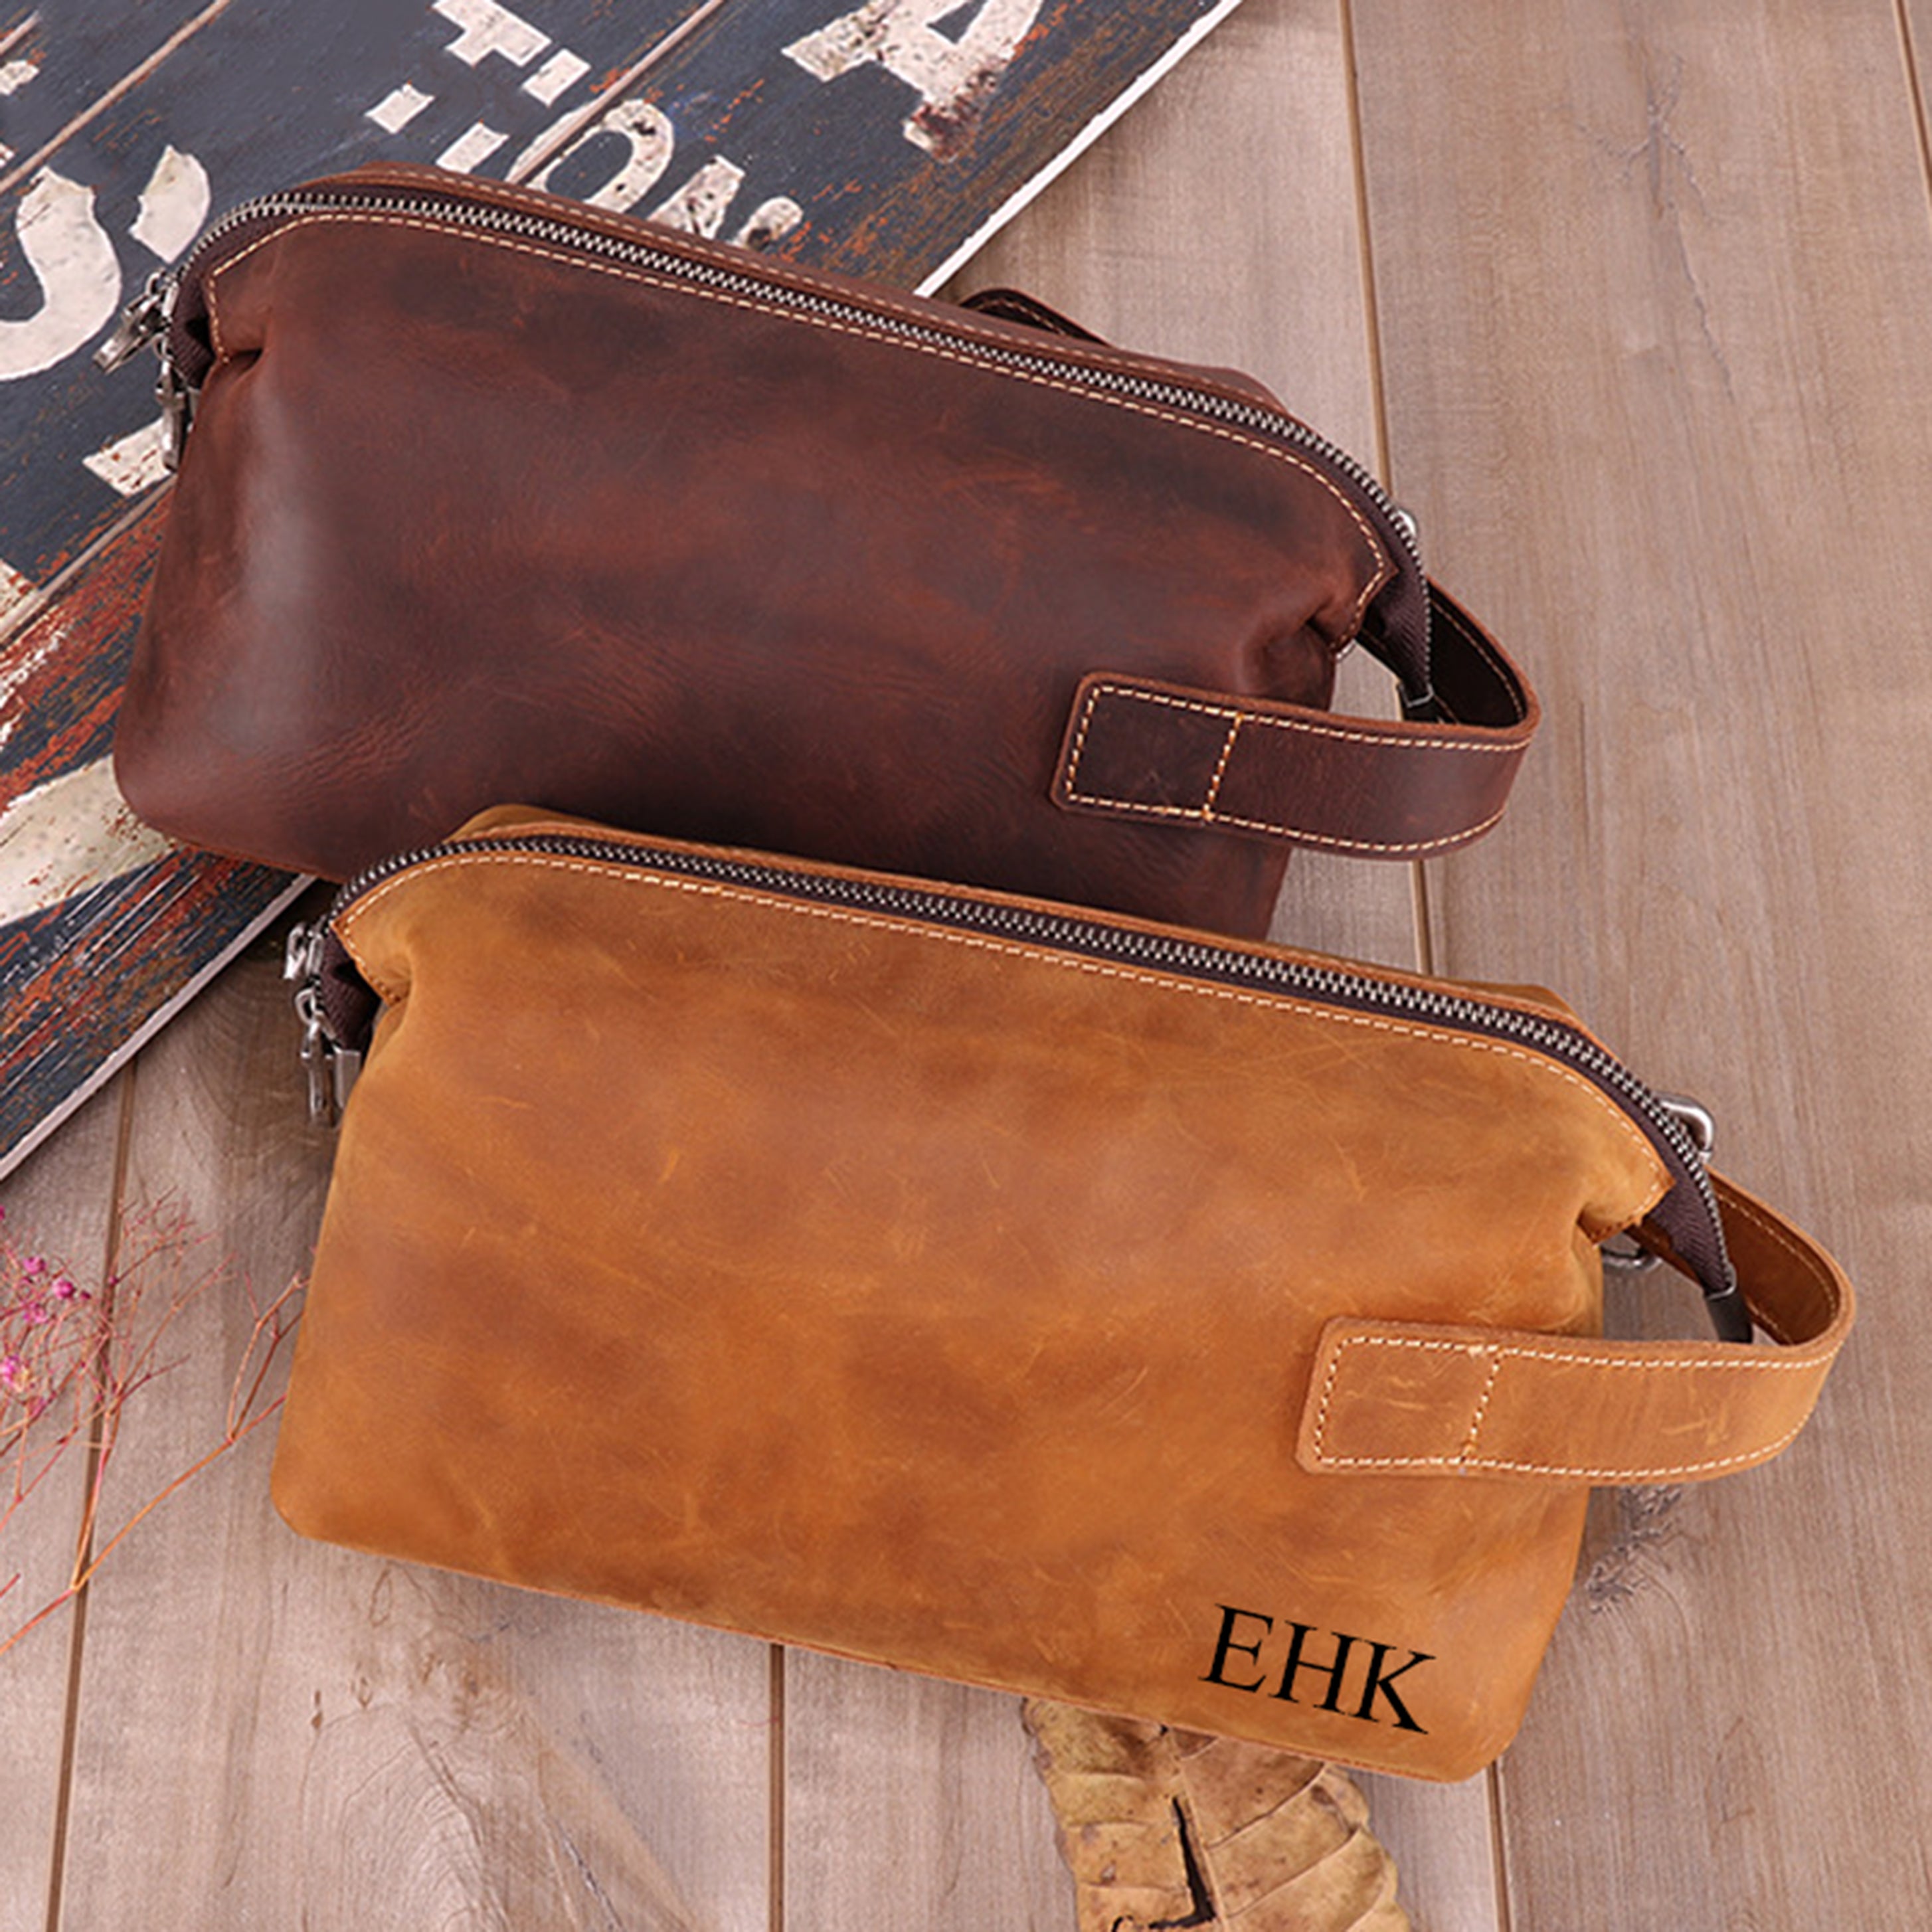 Personalized Leather Messenger Bags  MegaGear Store